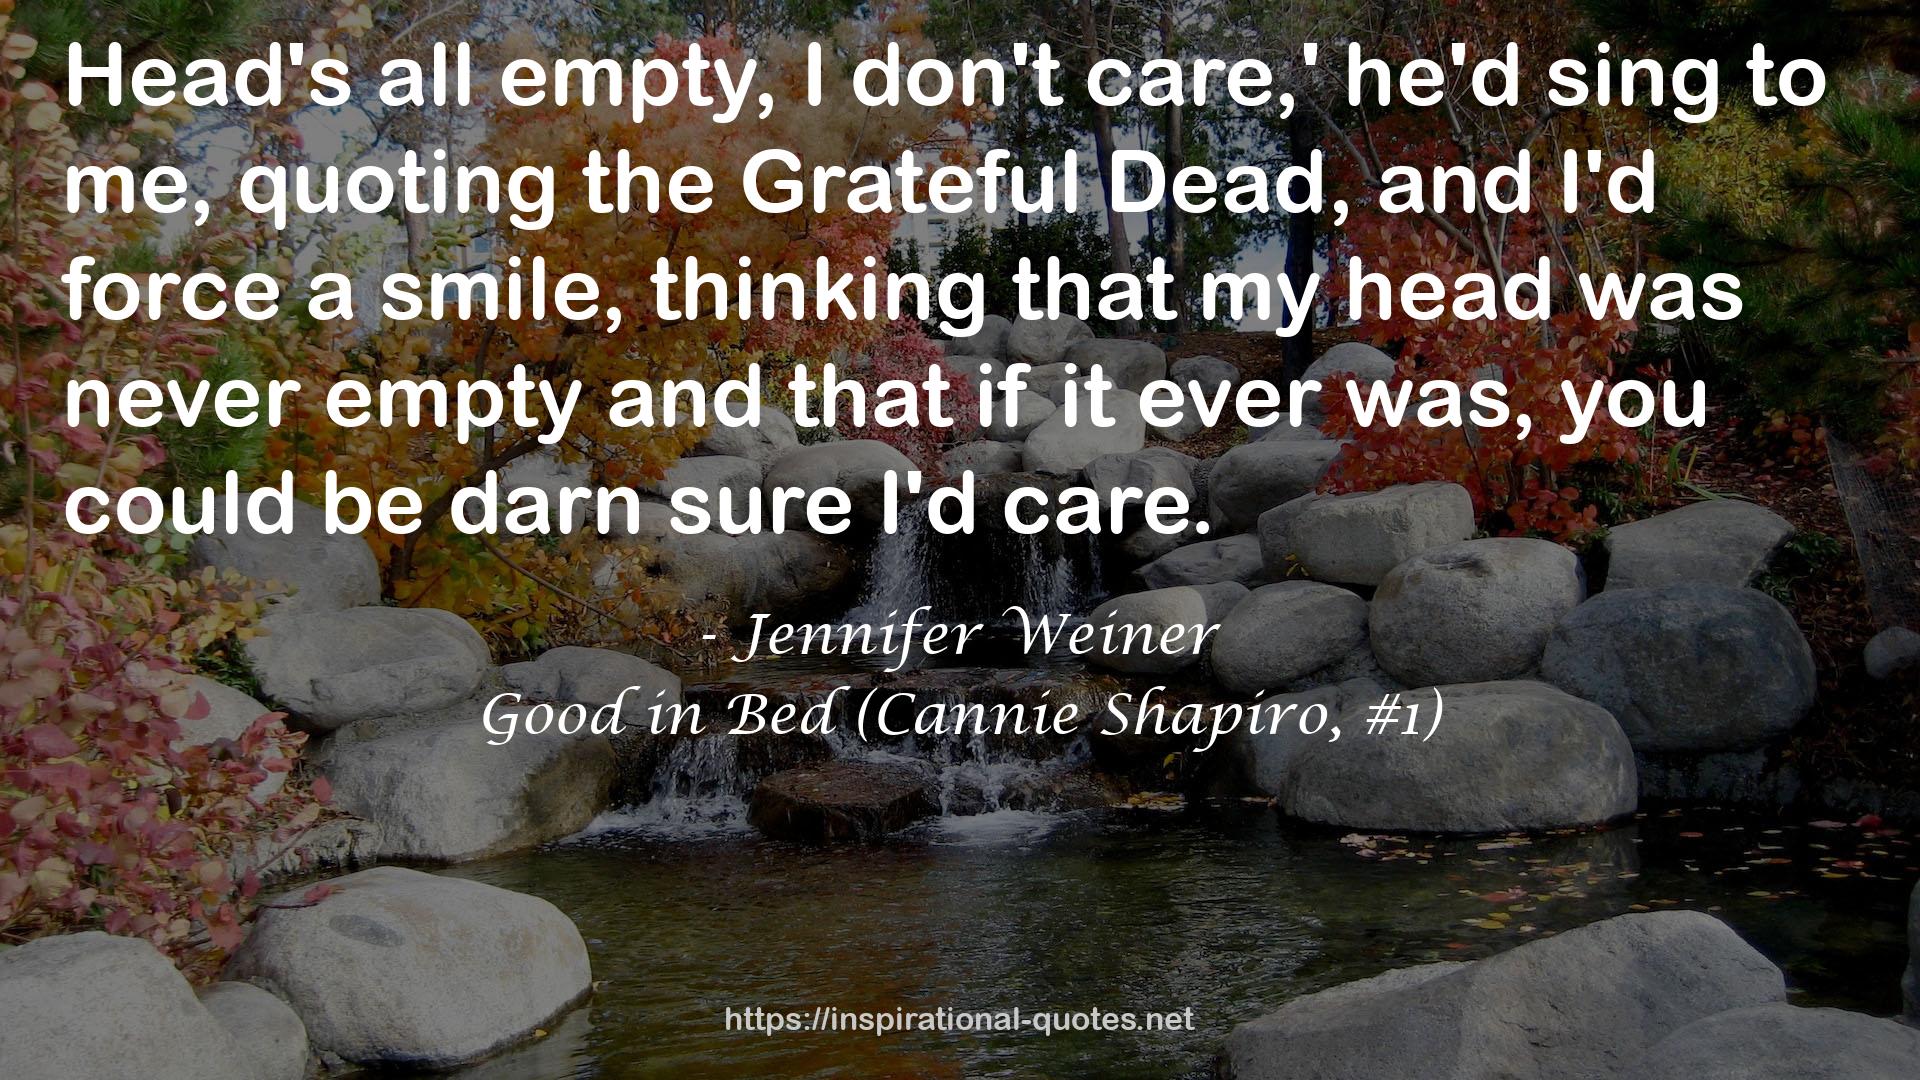 Good in Bed (Cannie Shapiro, #1) QUOTES